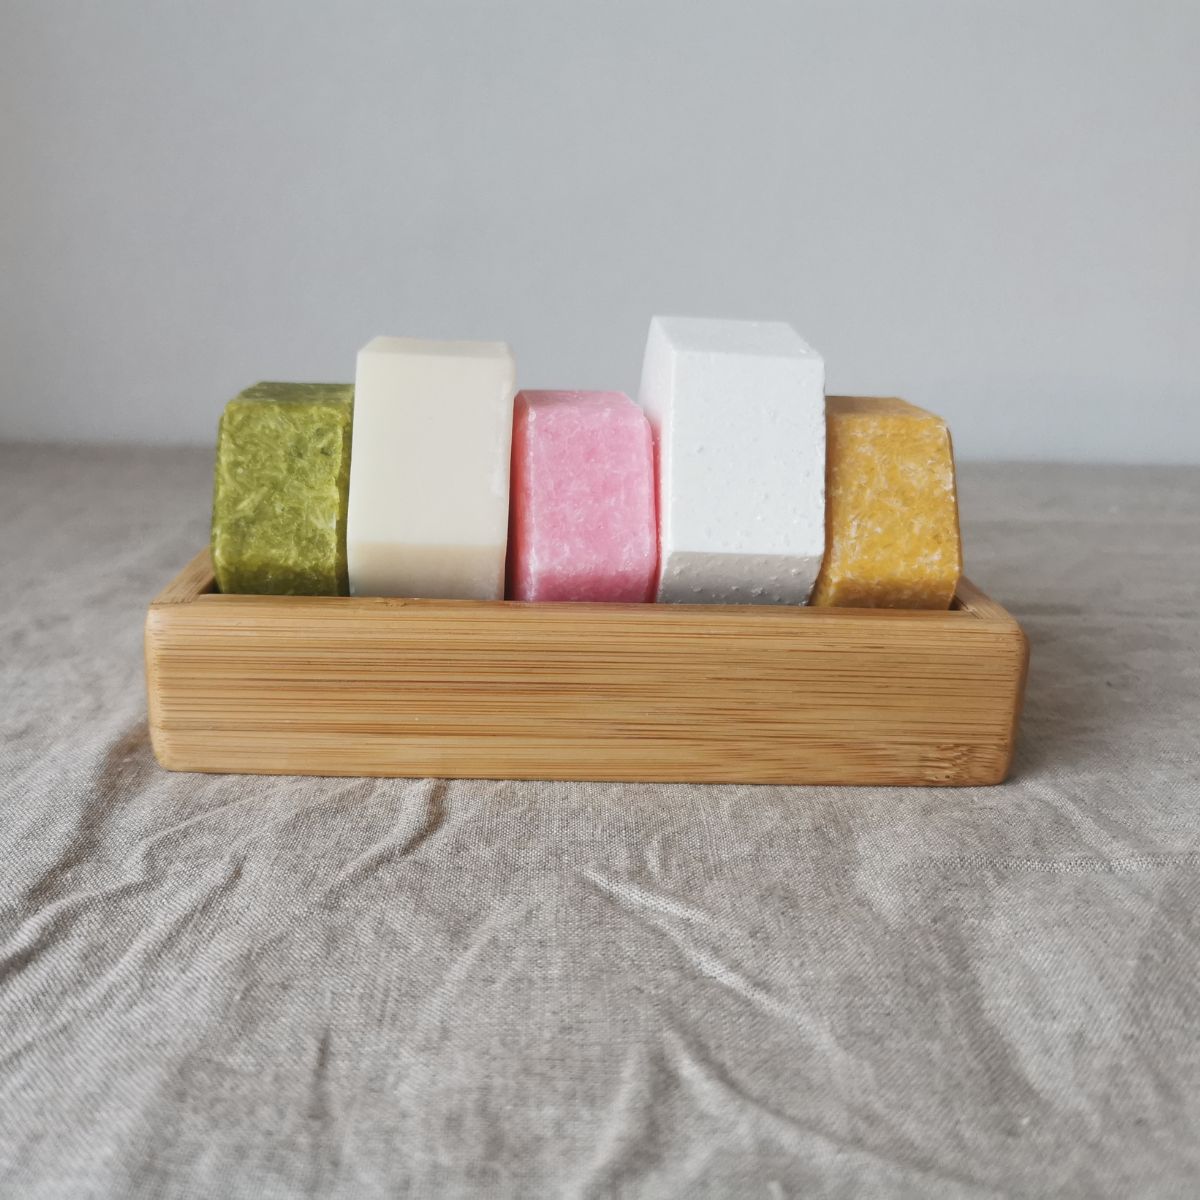 Harmony Soul Cleansing Soap - Cookii